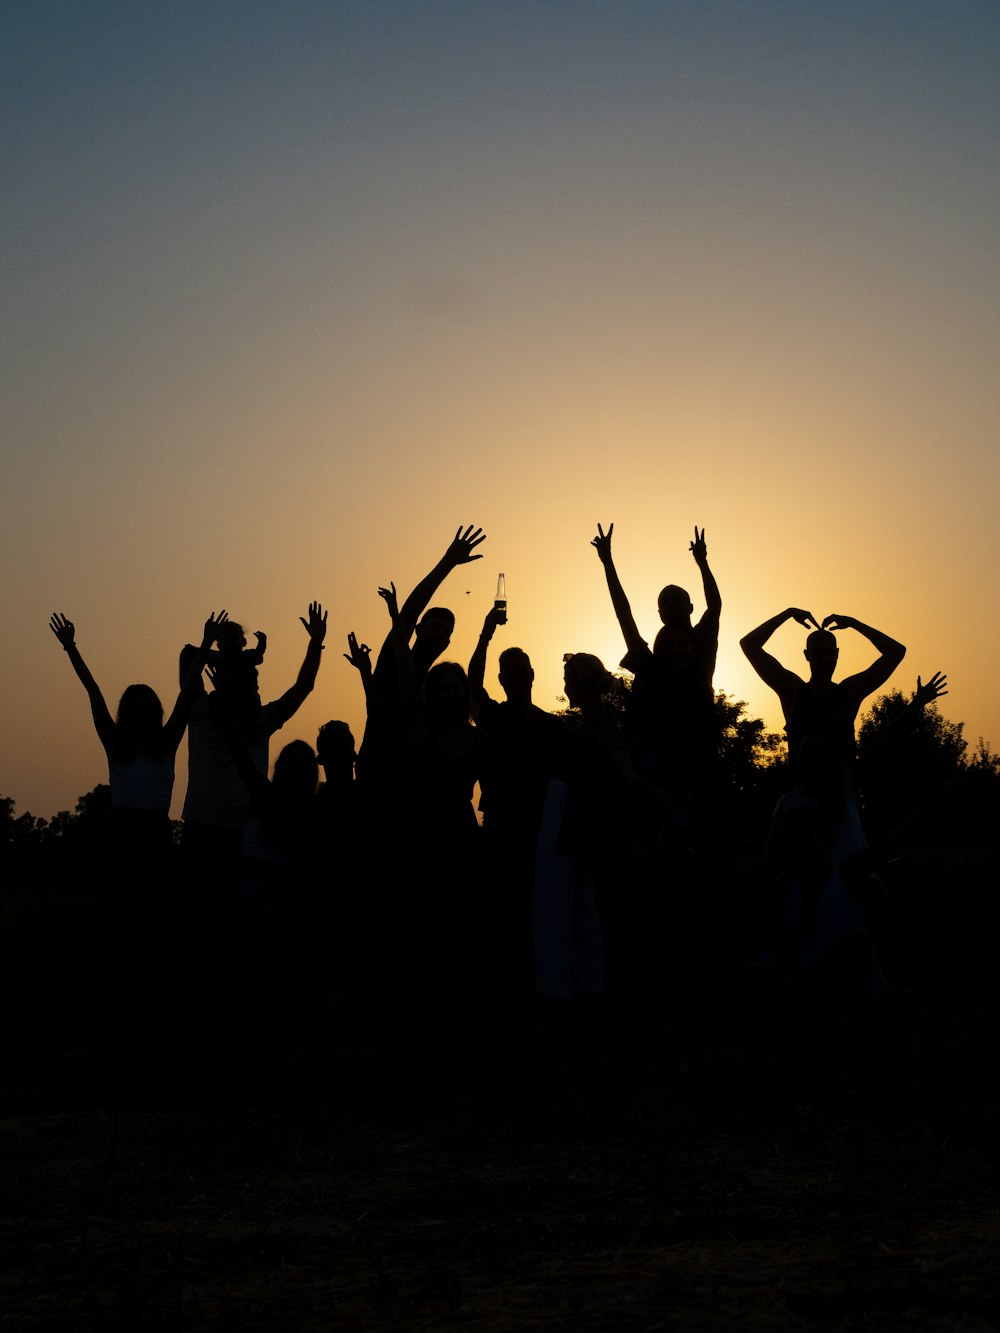 a group of people raising their hands